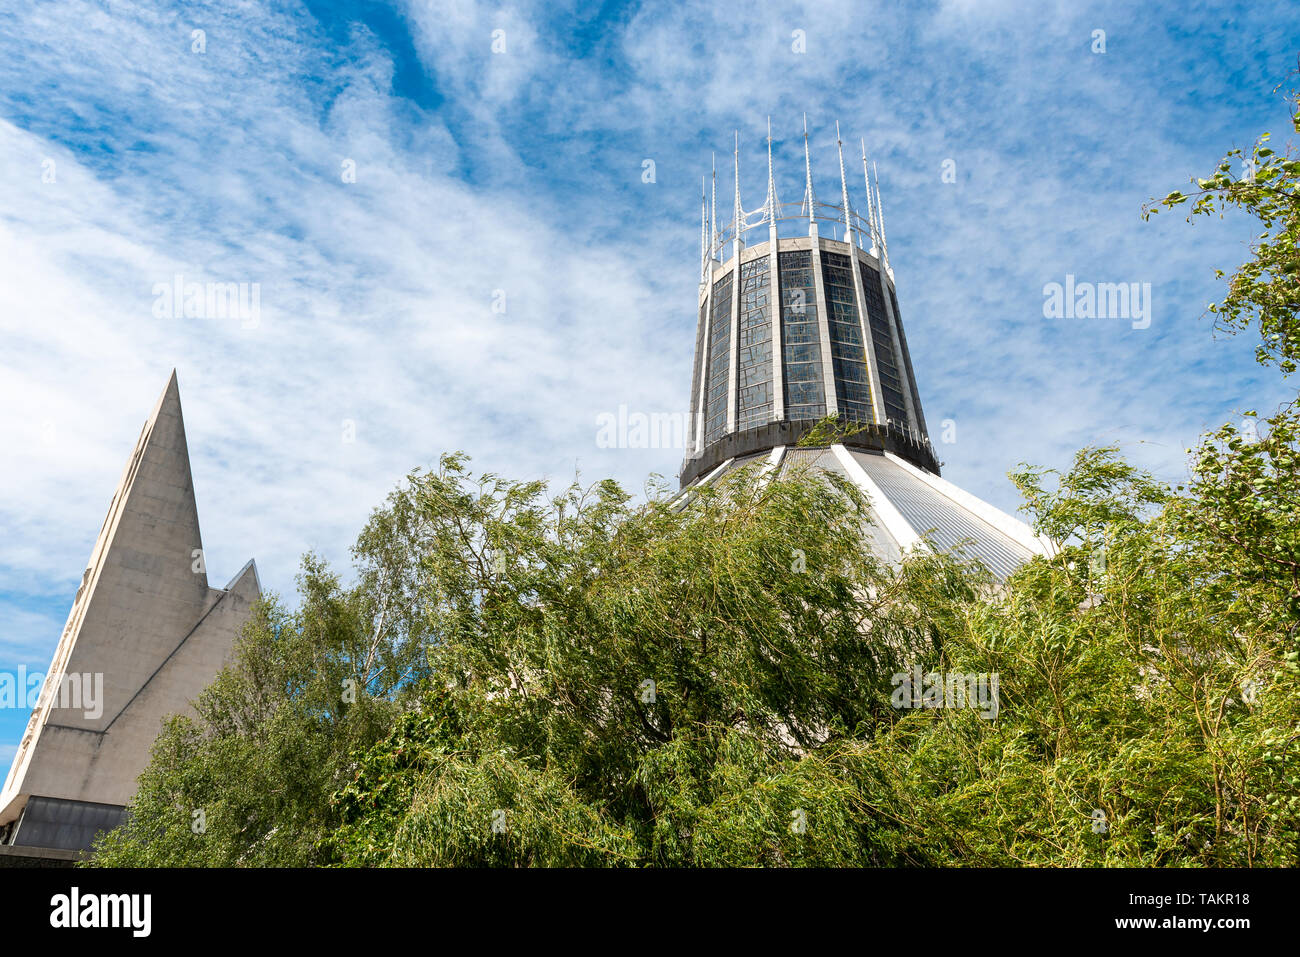 LIVERPOOL, UK, 26 MAY 2019: A view documenting the interior of the  Metropolitan Cathedral of Christ the King, in Liverpool. Stock Photo